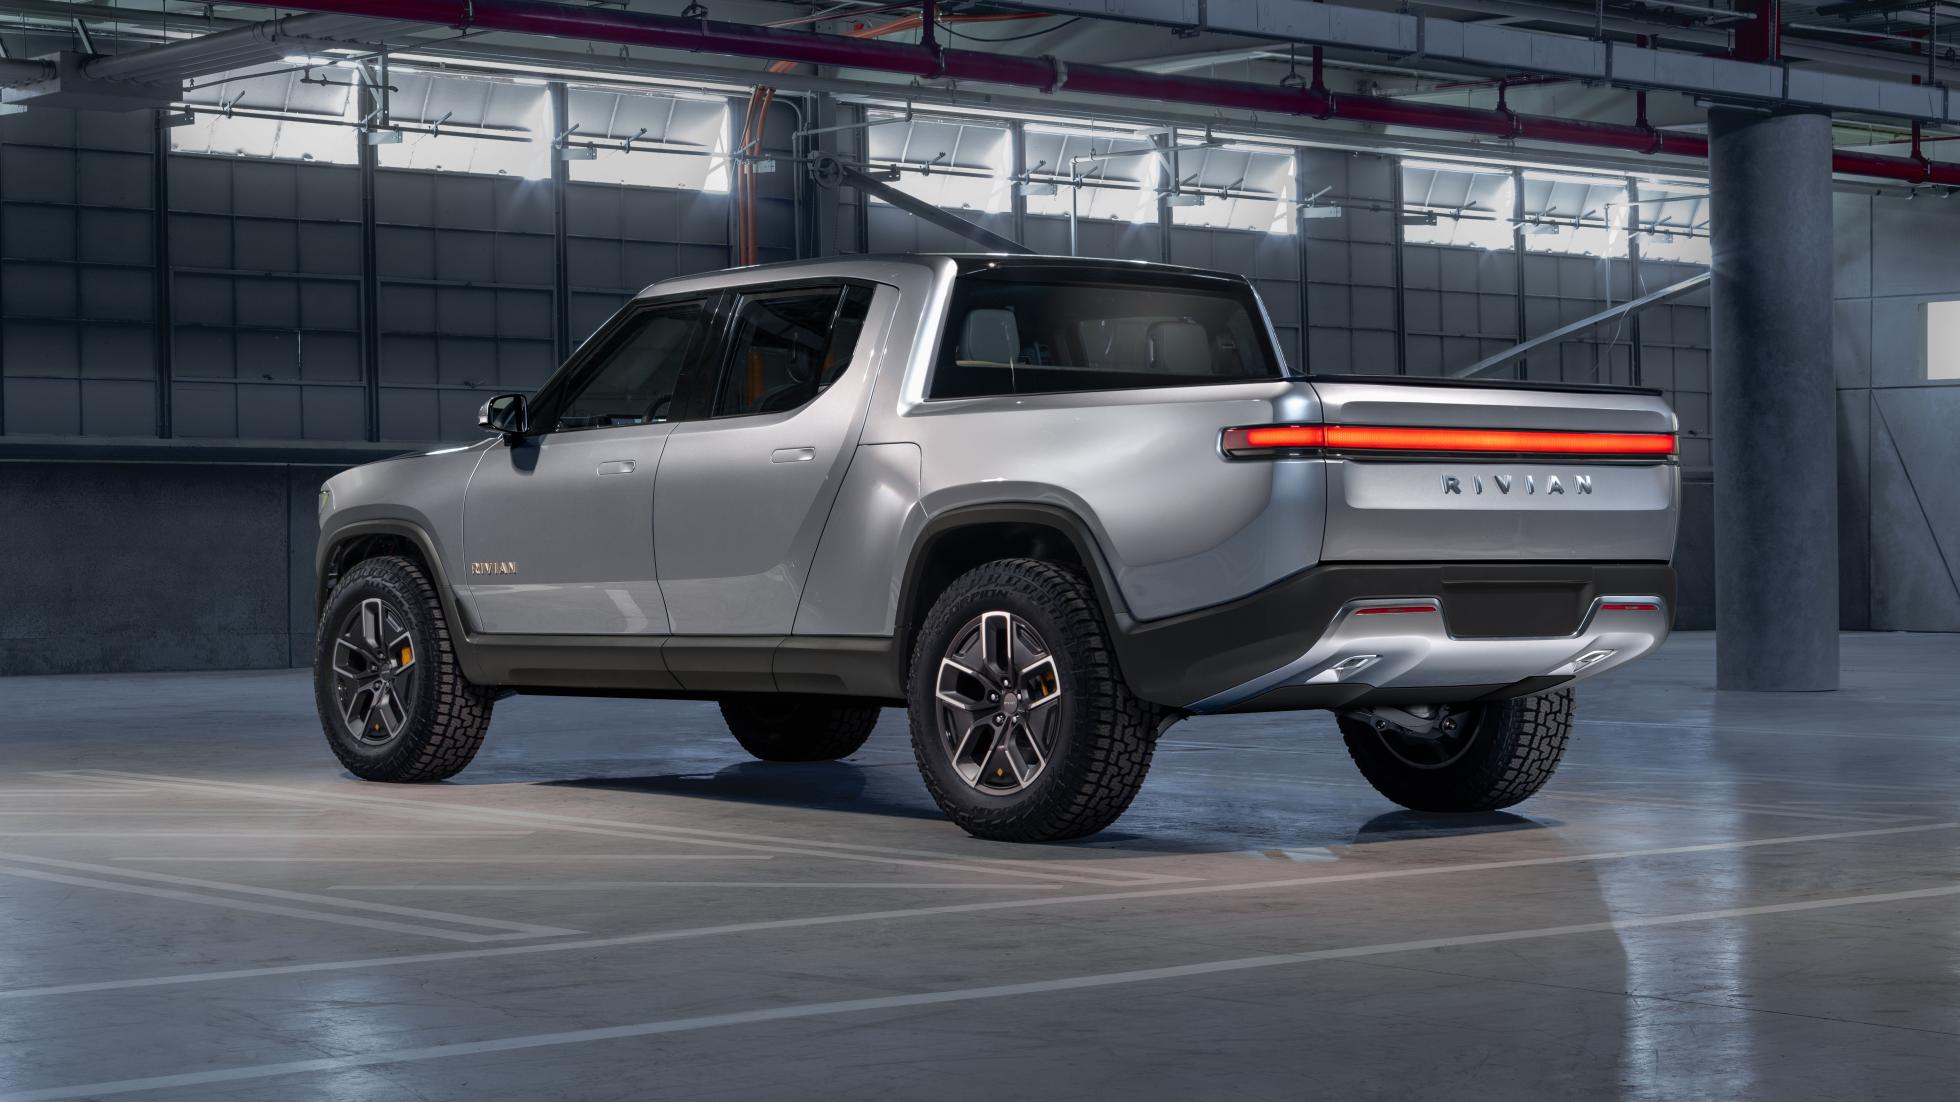 Rivian R1T electric pickup truck seems to have hit the sweet spot